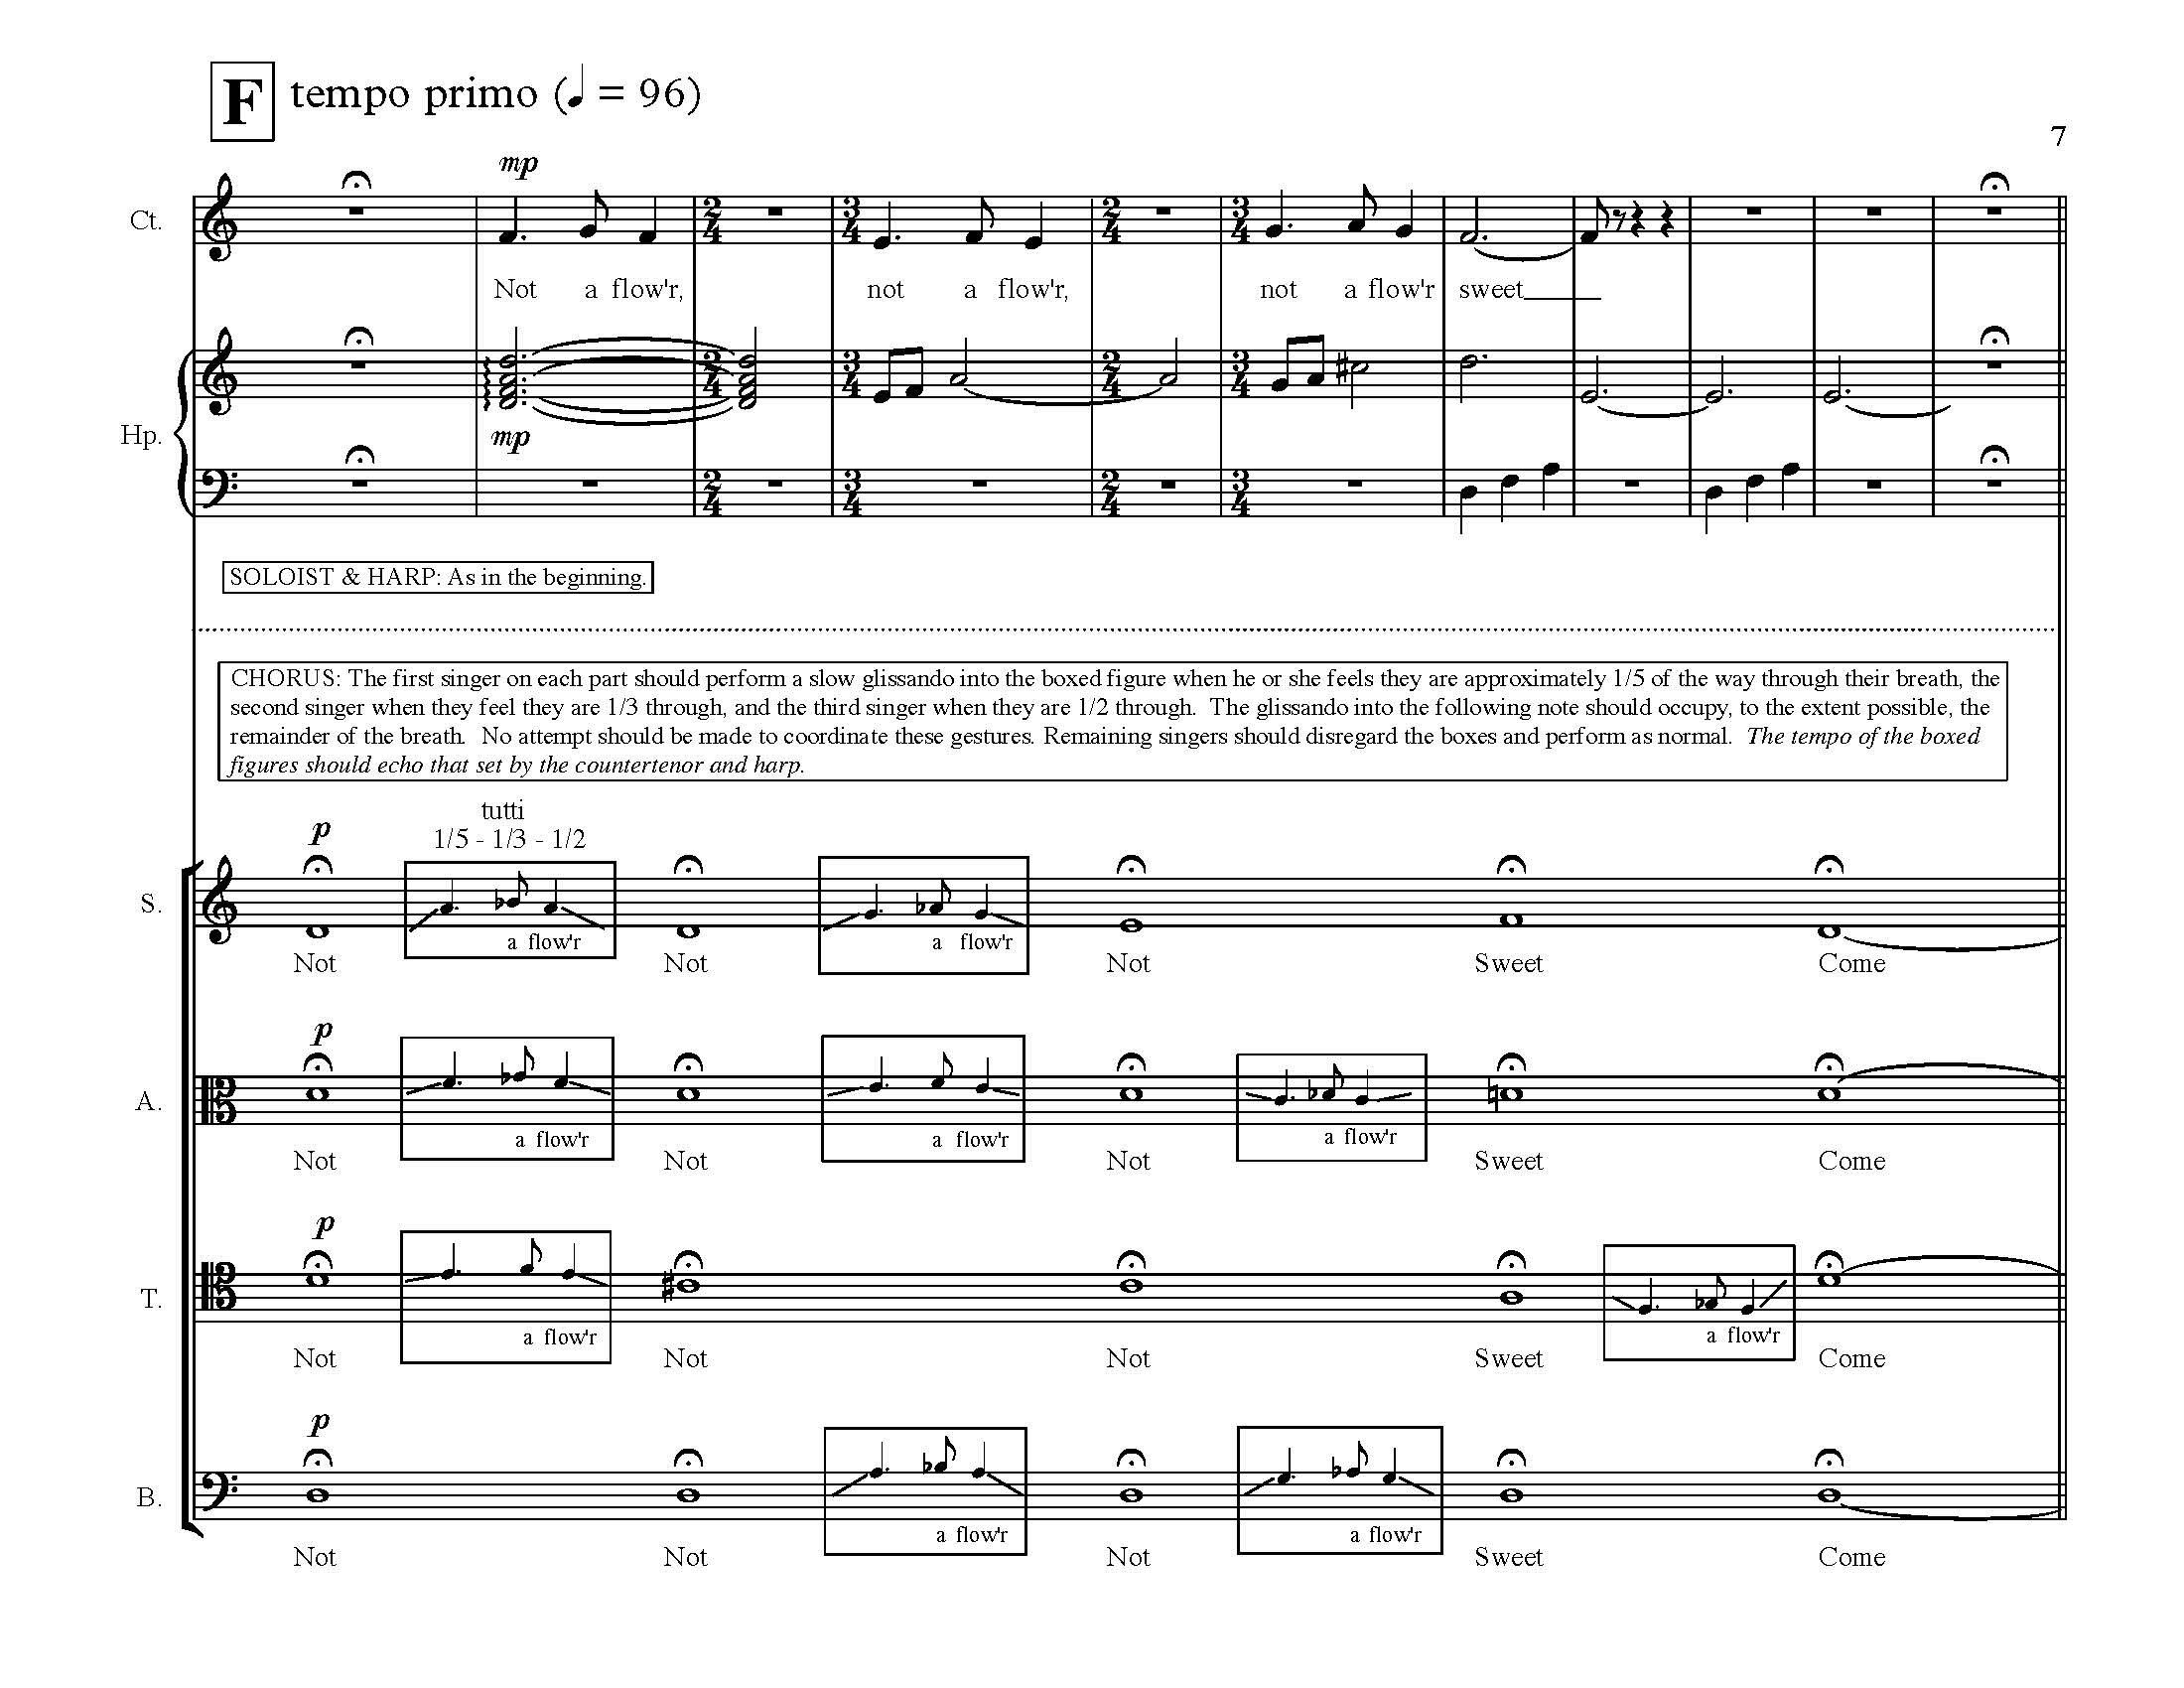 Come Away Death - Complete Score_Page_13.jpg